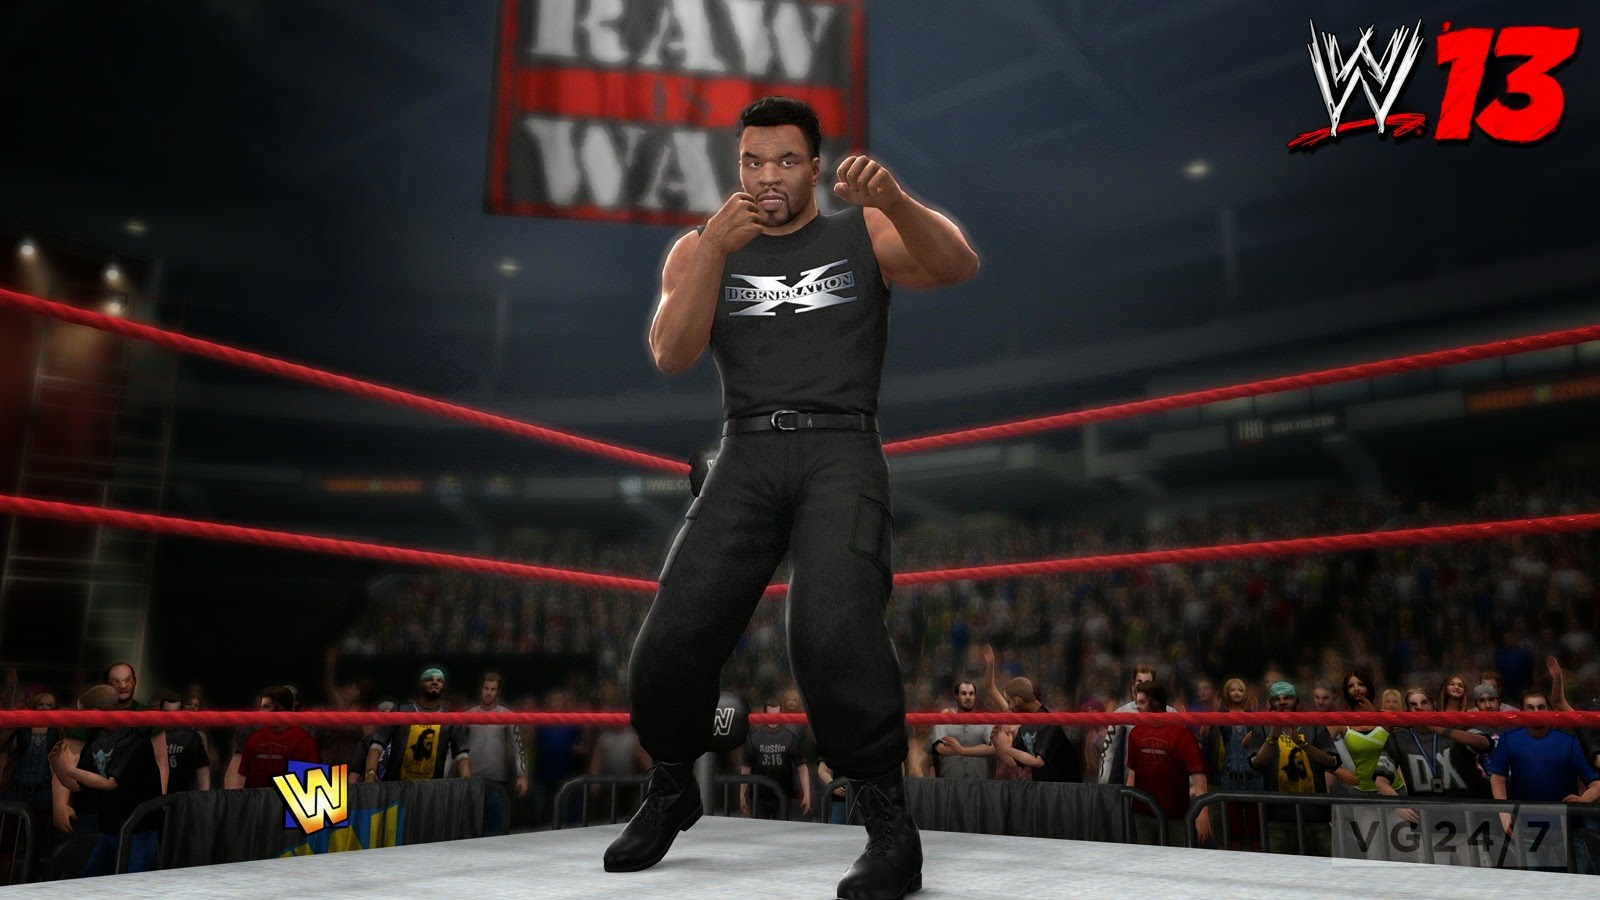 Wwe 2k12 download for pc